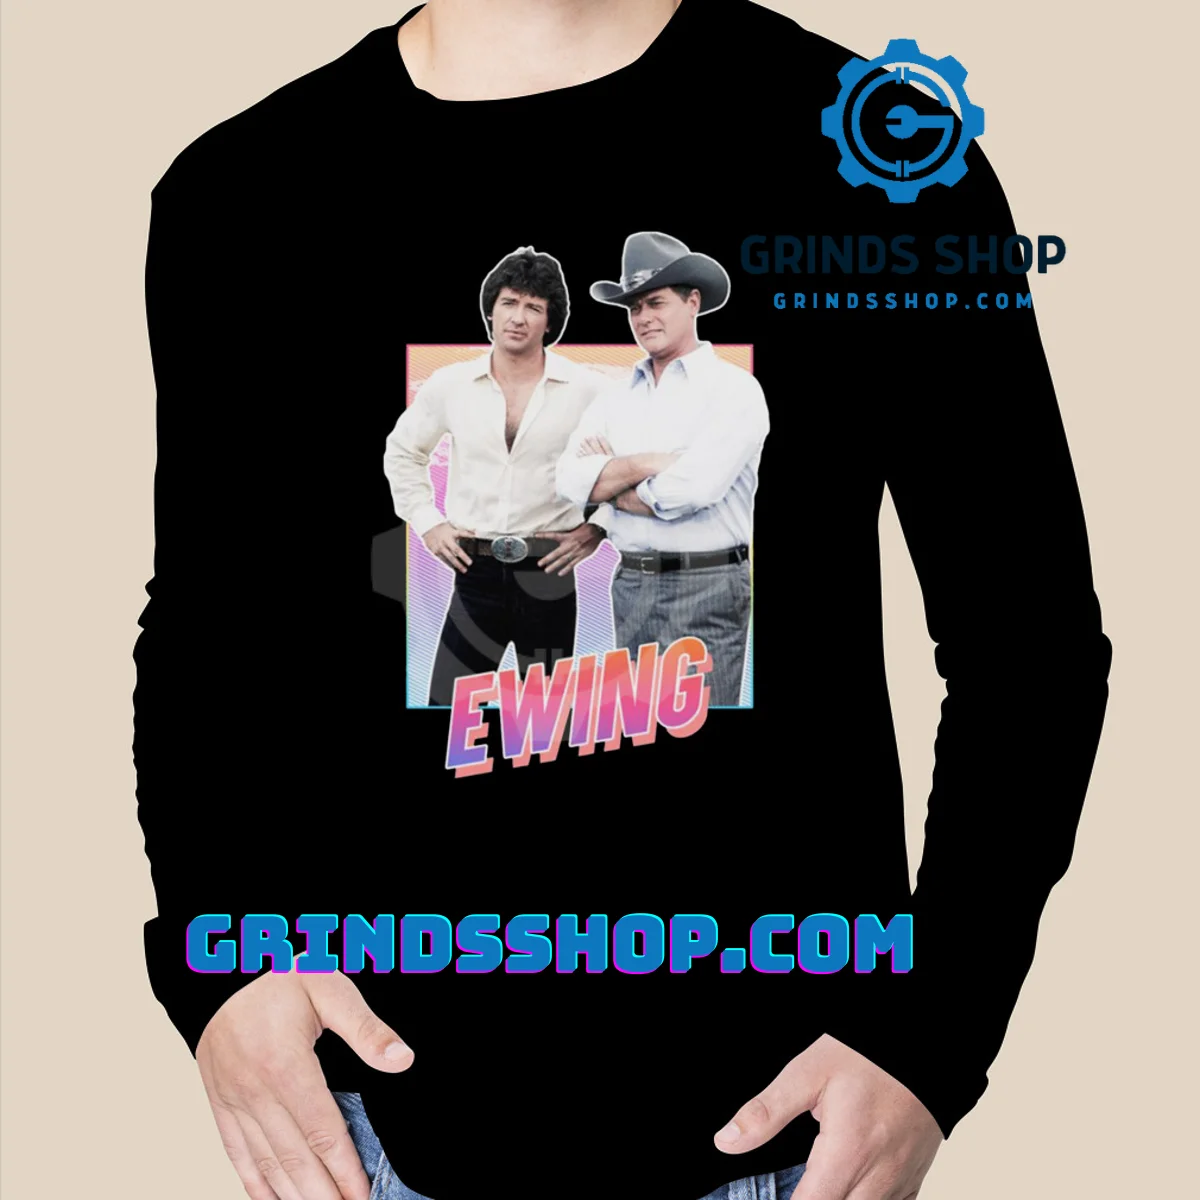 Ewing Brothers 80s From shirt